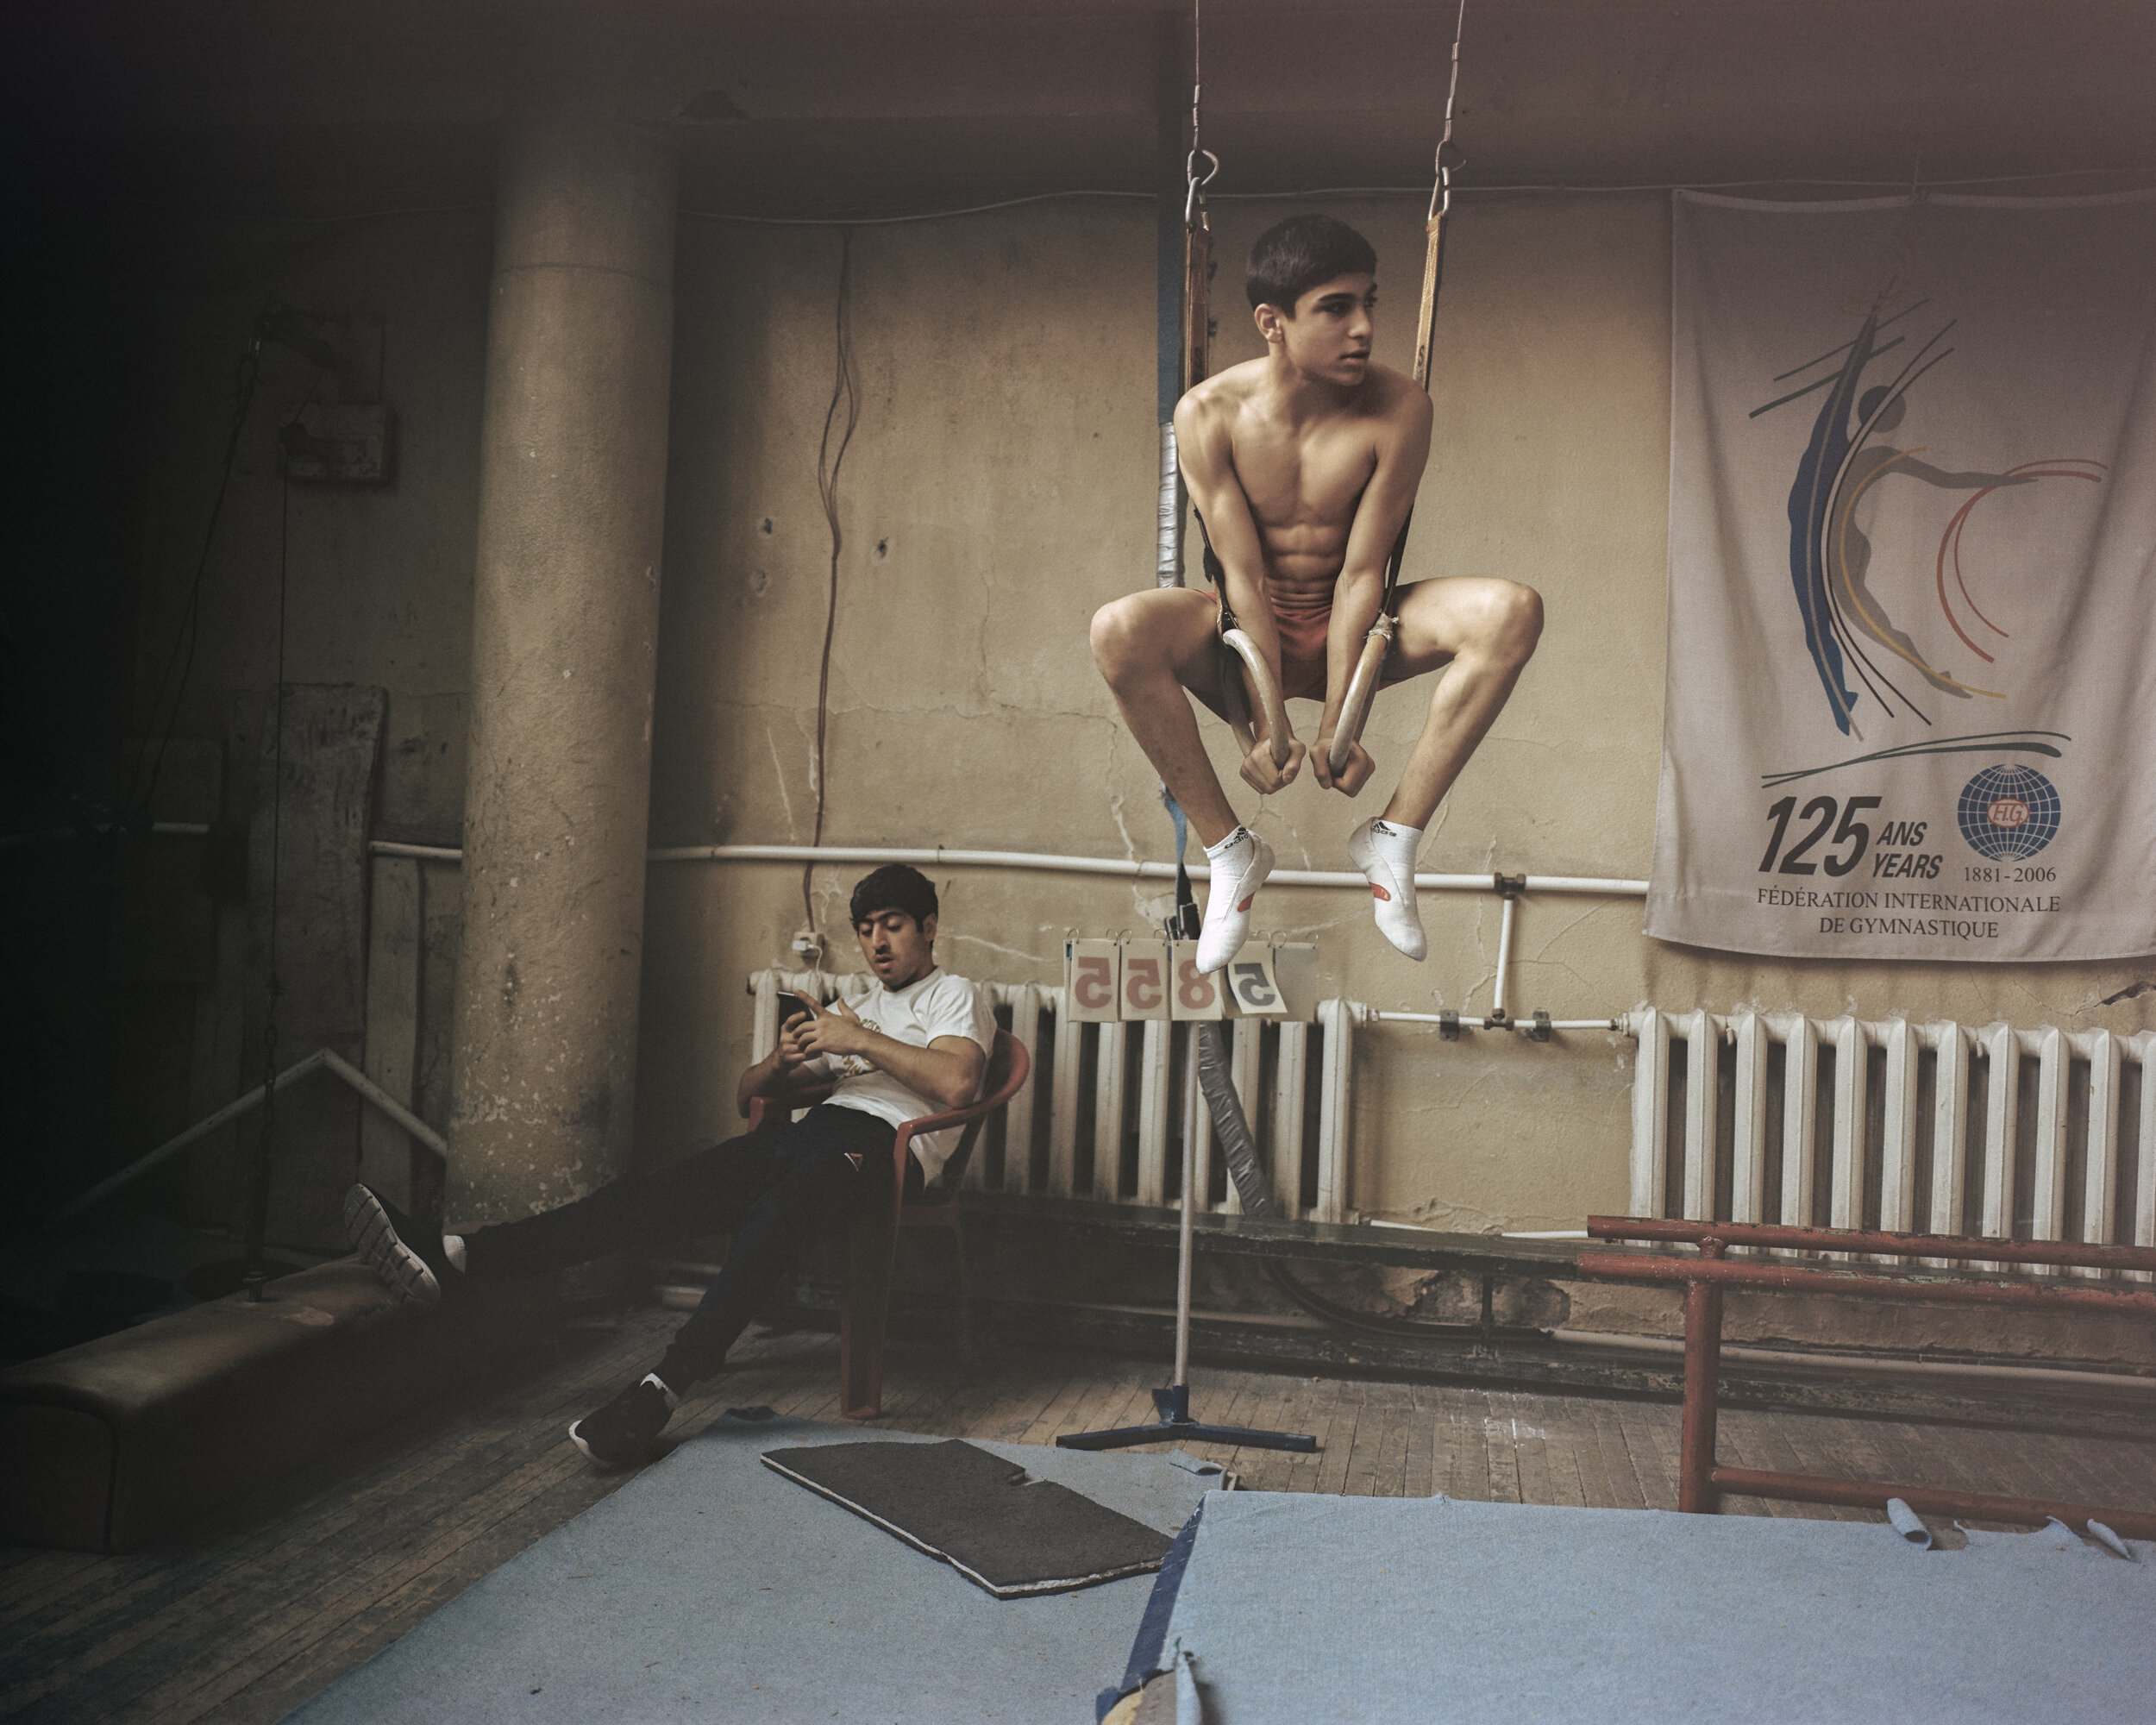  In 2018, I started to photograph sport trainings and competitions all around Armenia. I focused on the most traditional and popular post-soviet sports such as wrestling, weightlifting and gymnastics. My goal was to visualize the obsession of Armenia